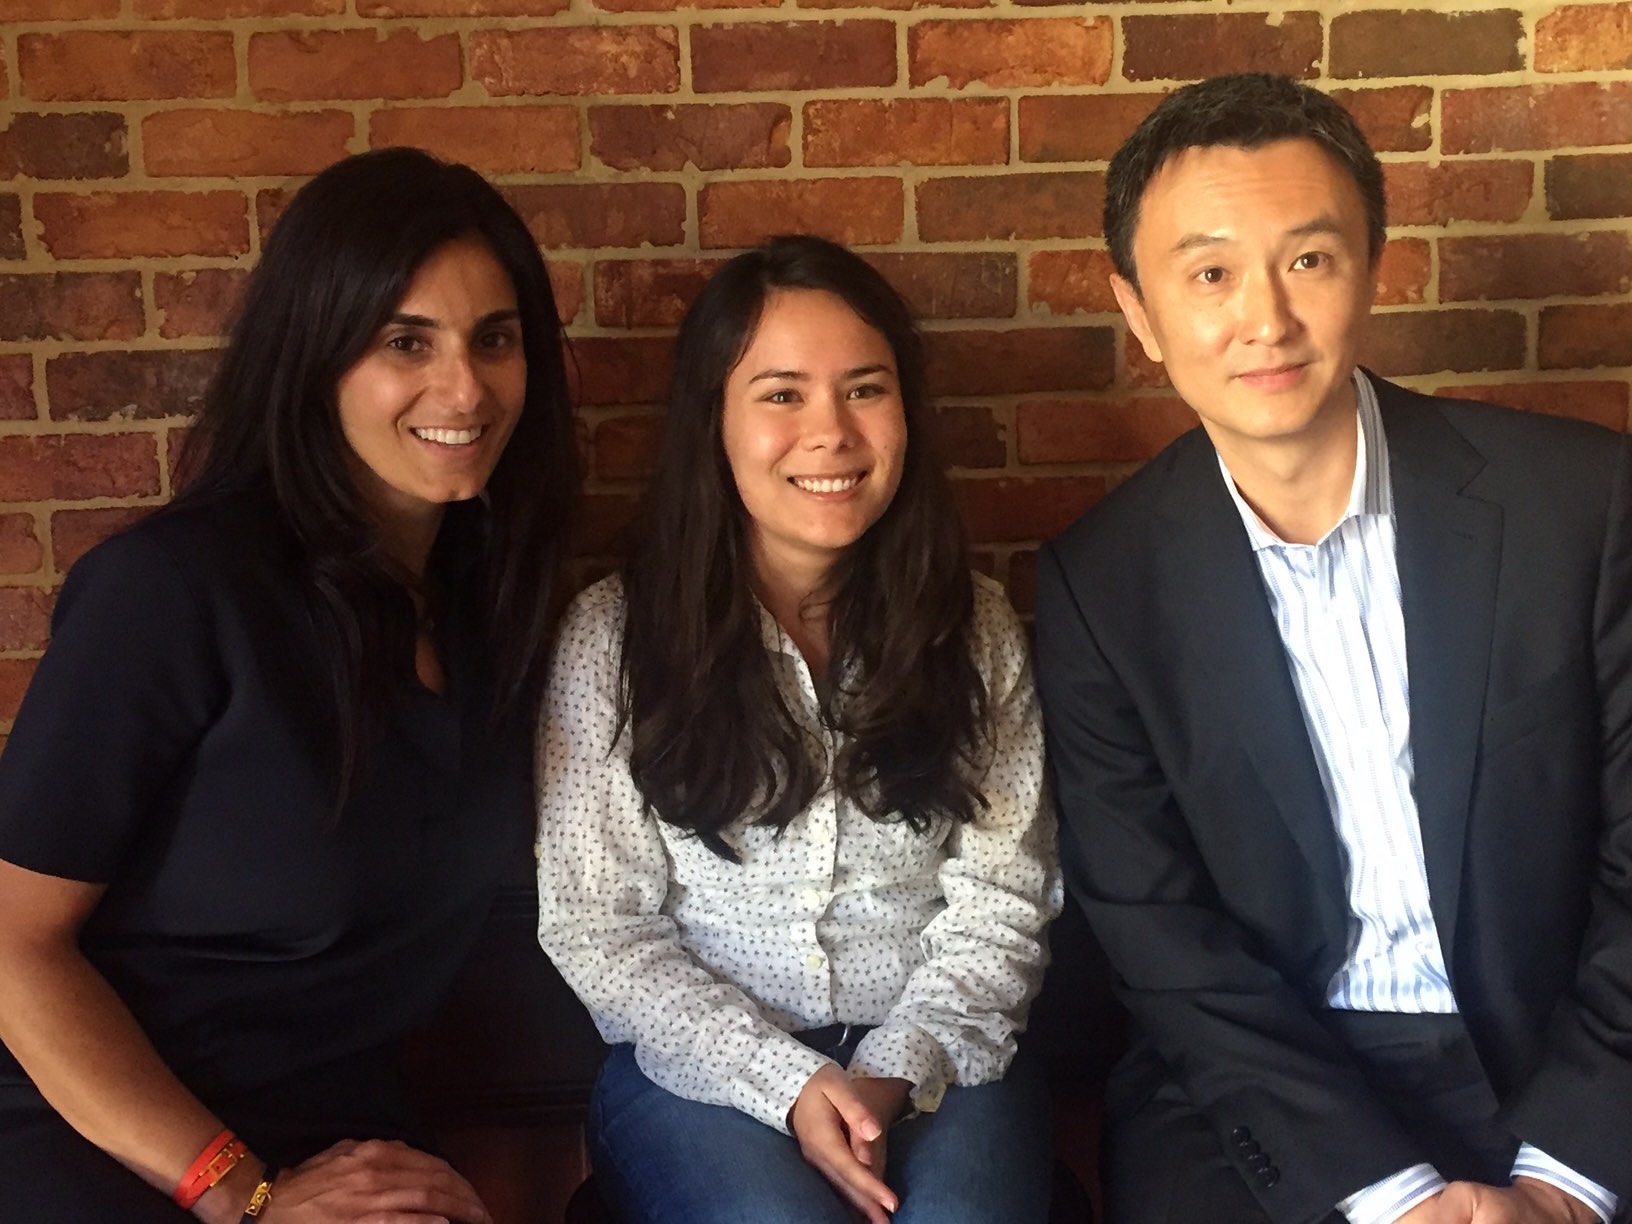 Zuora’s Tien Tzuo and Alvina Antar on the Dynamics of Power and Diversity